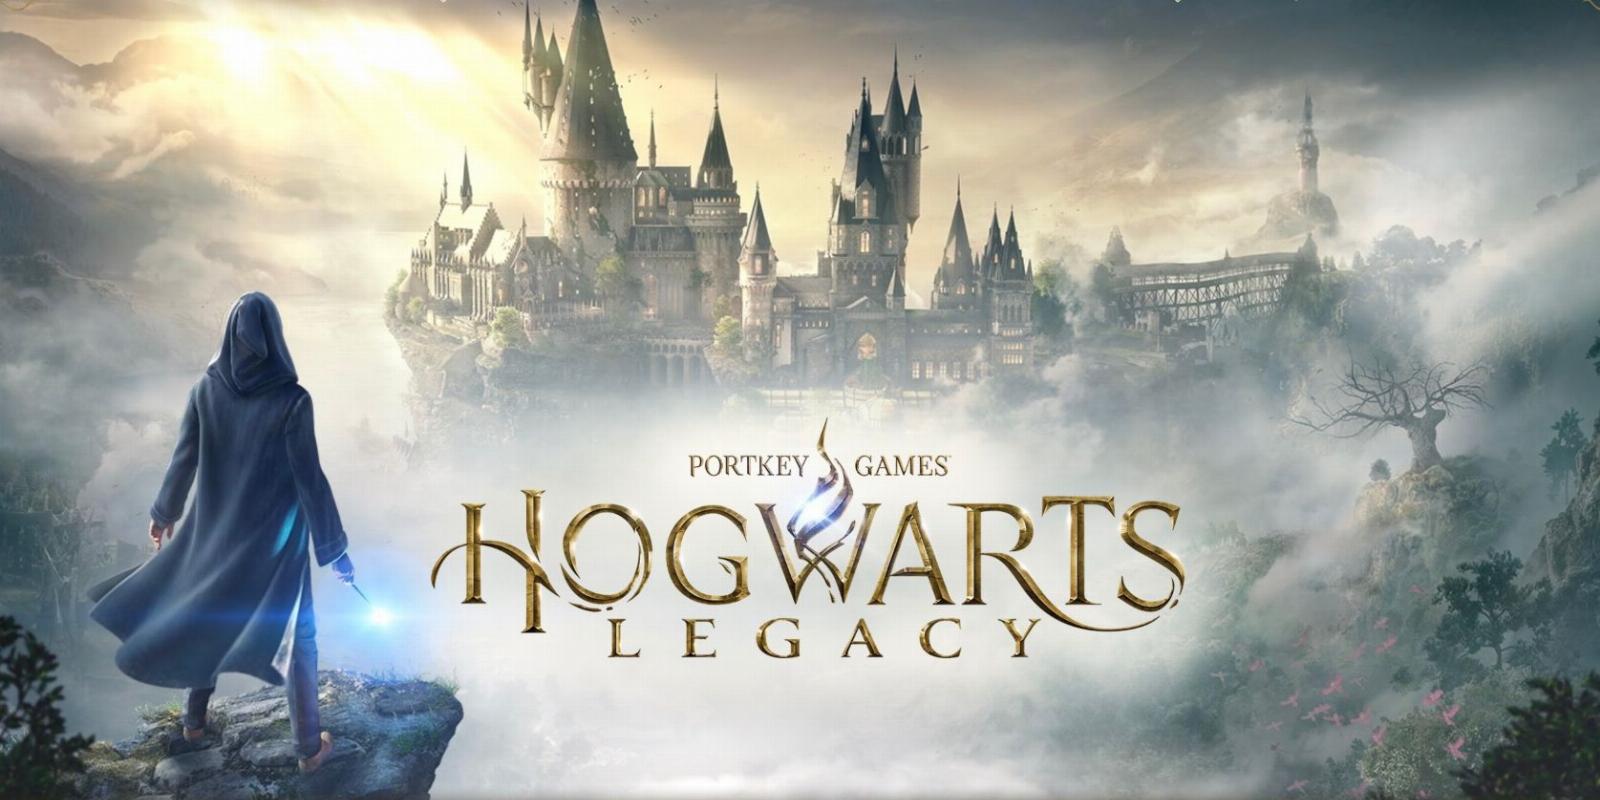 How to Fix the ‘Out of Video Memory’ Error in Hogwarts Legacy on Windows